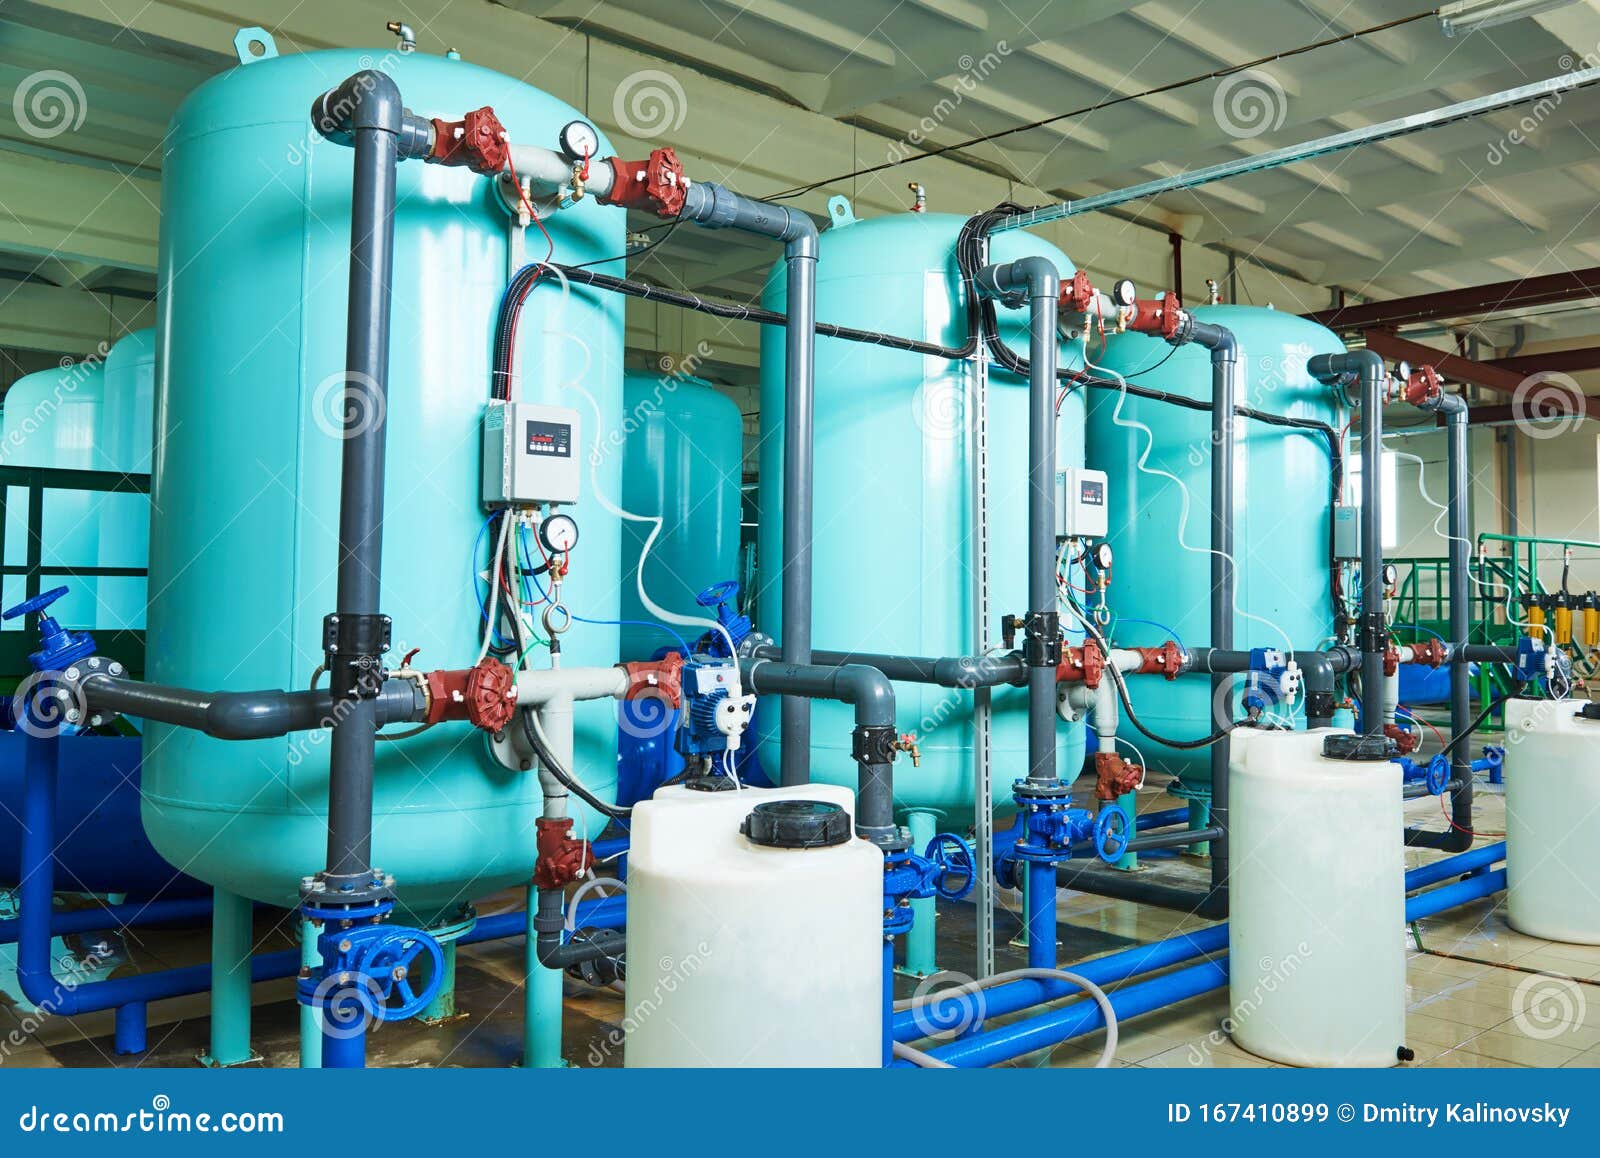 industrial water purification system or filtration equipment